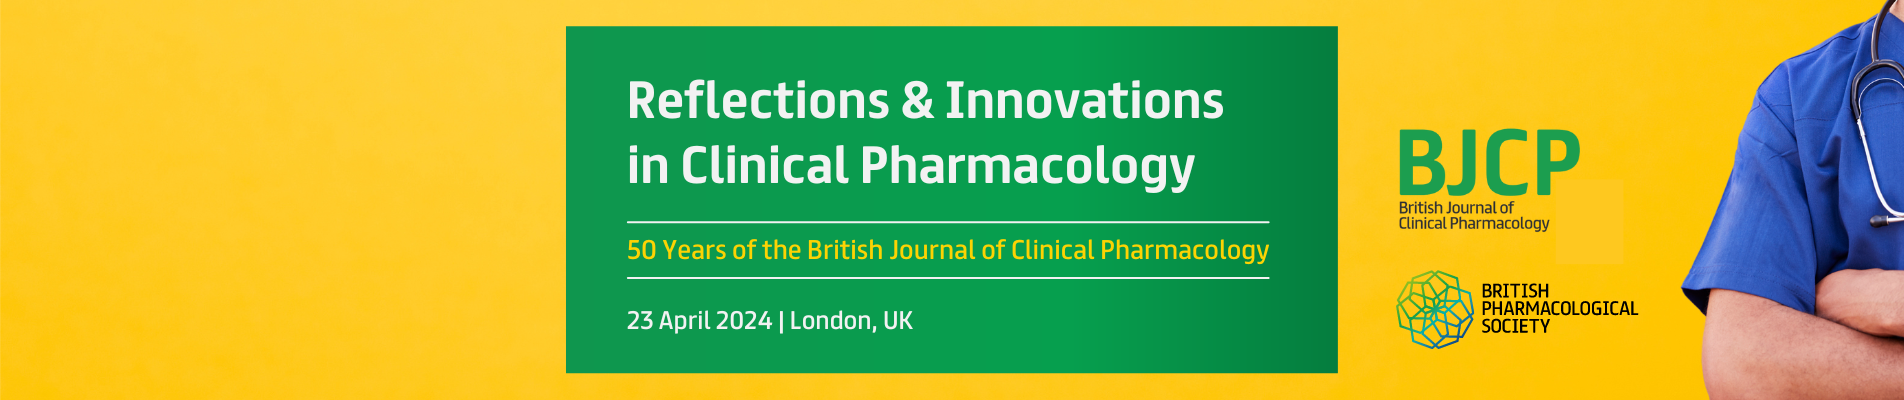 Reflections & Innovations in Clinical Pharmacology: 50 Years of the BJCP